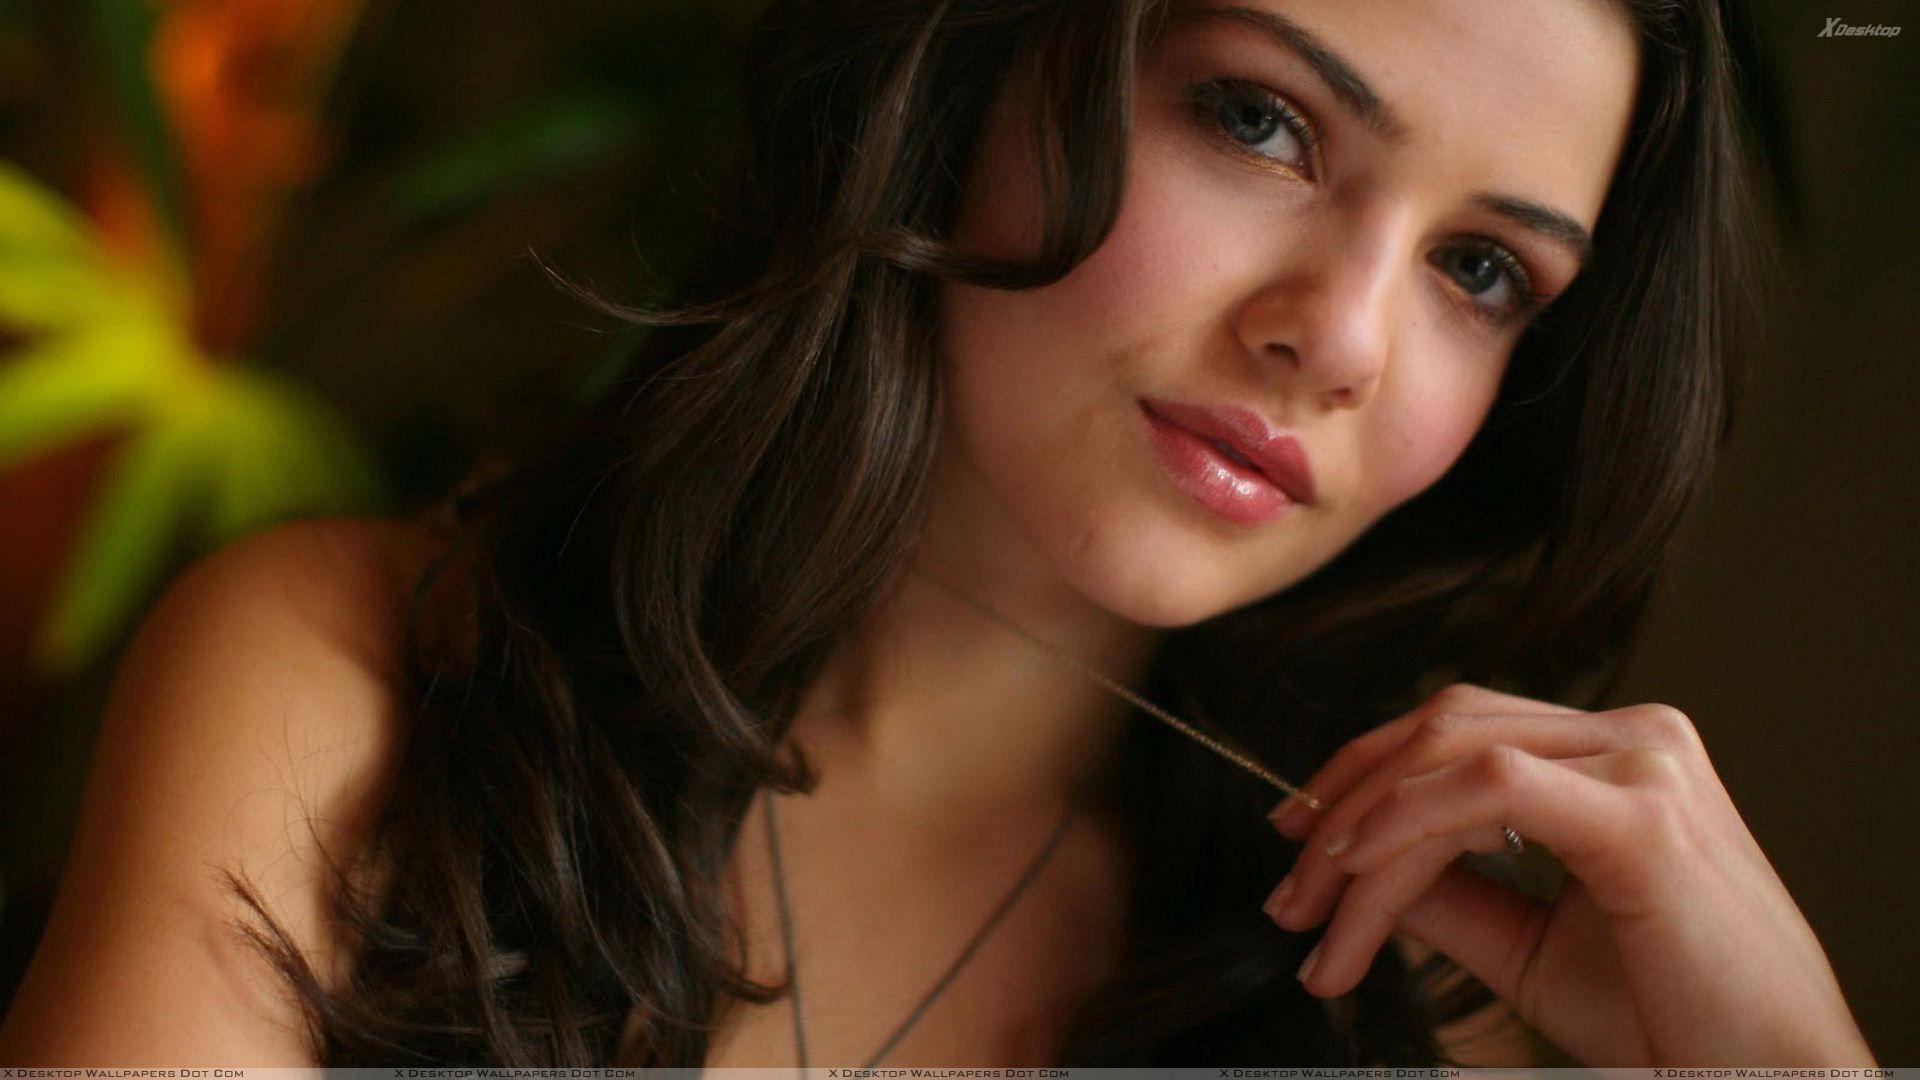 Danielle Campbell Wallpaper, Photo & Image in HD